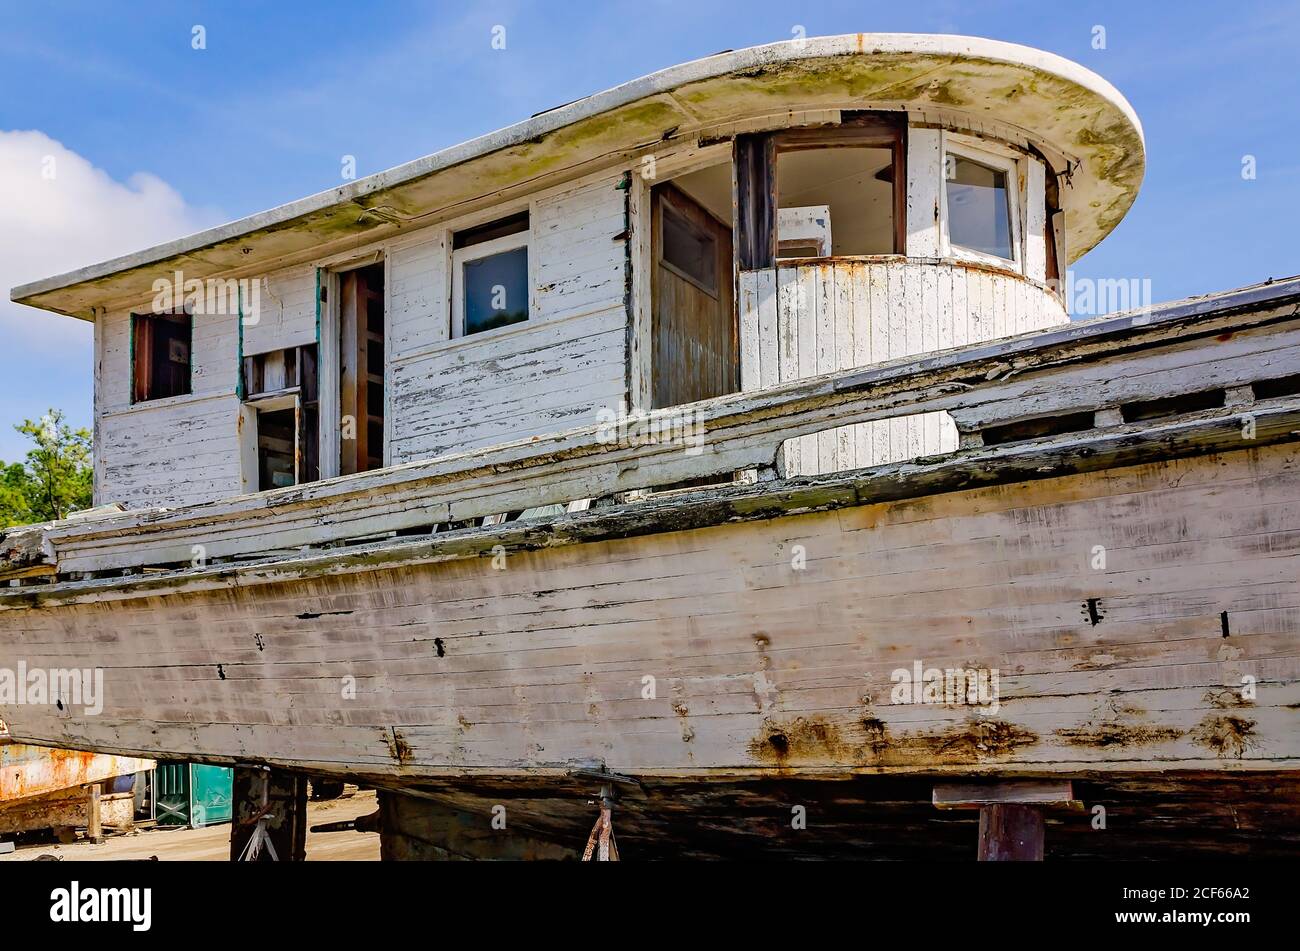 An old wooden shrimp boat sits in dry dock for repair at a local shipyard, Feb. 17, 2018, in Bayou La Batre, Alabama. Stock Photo